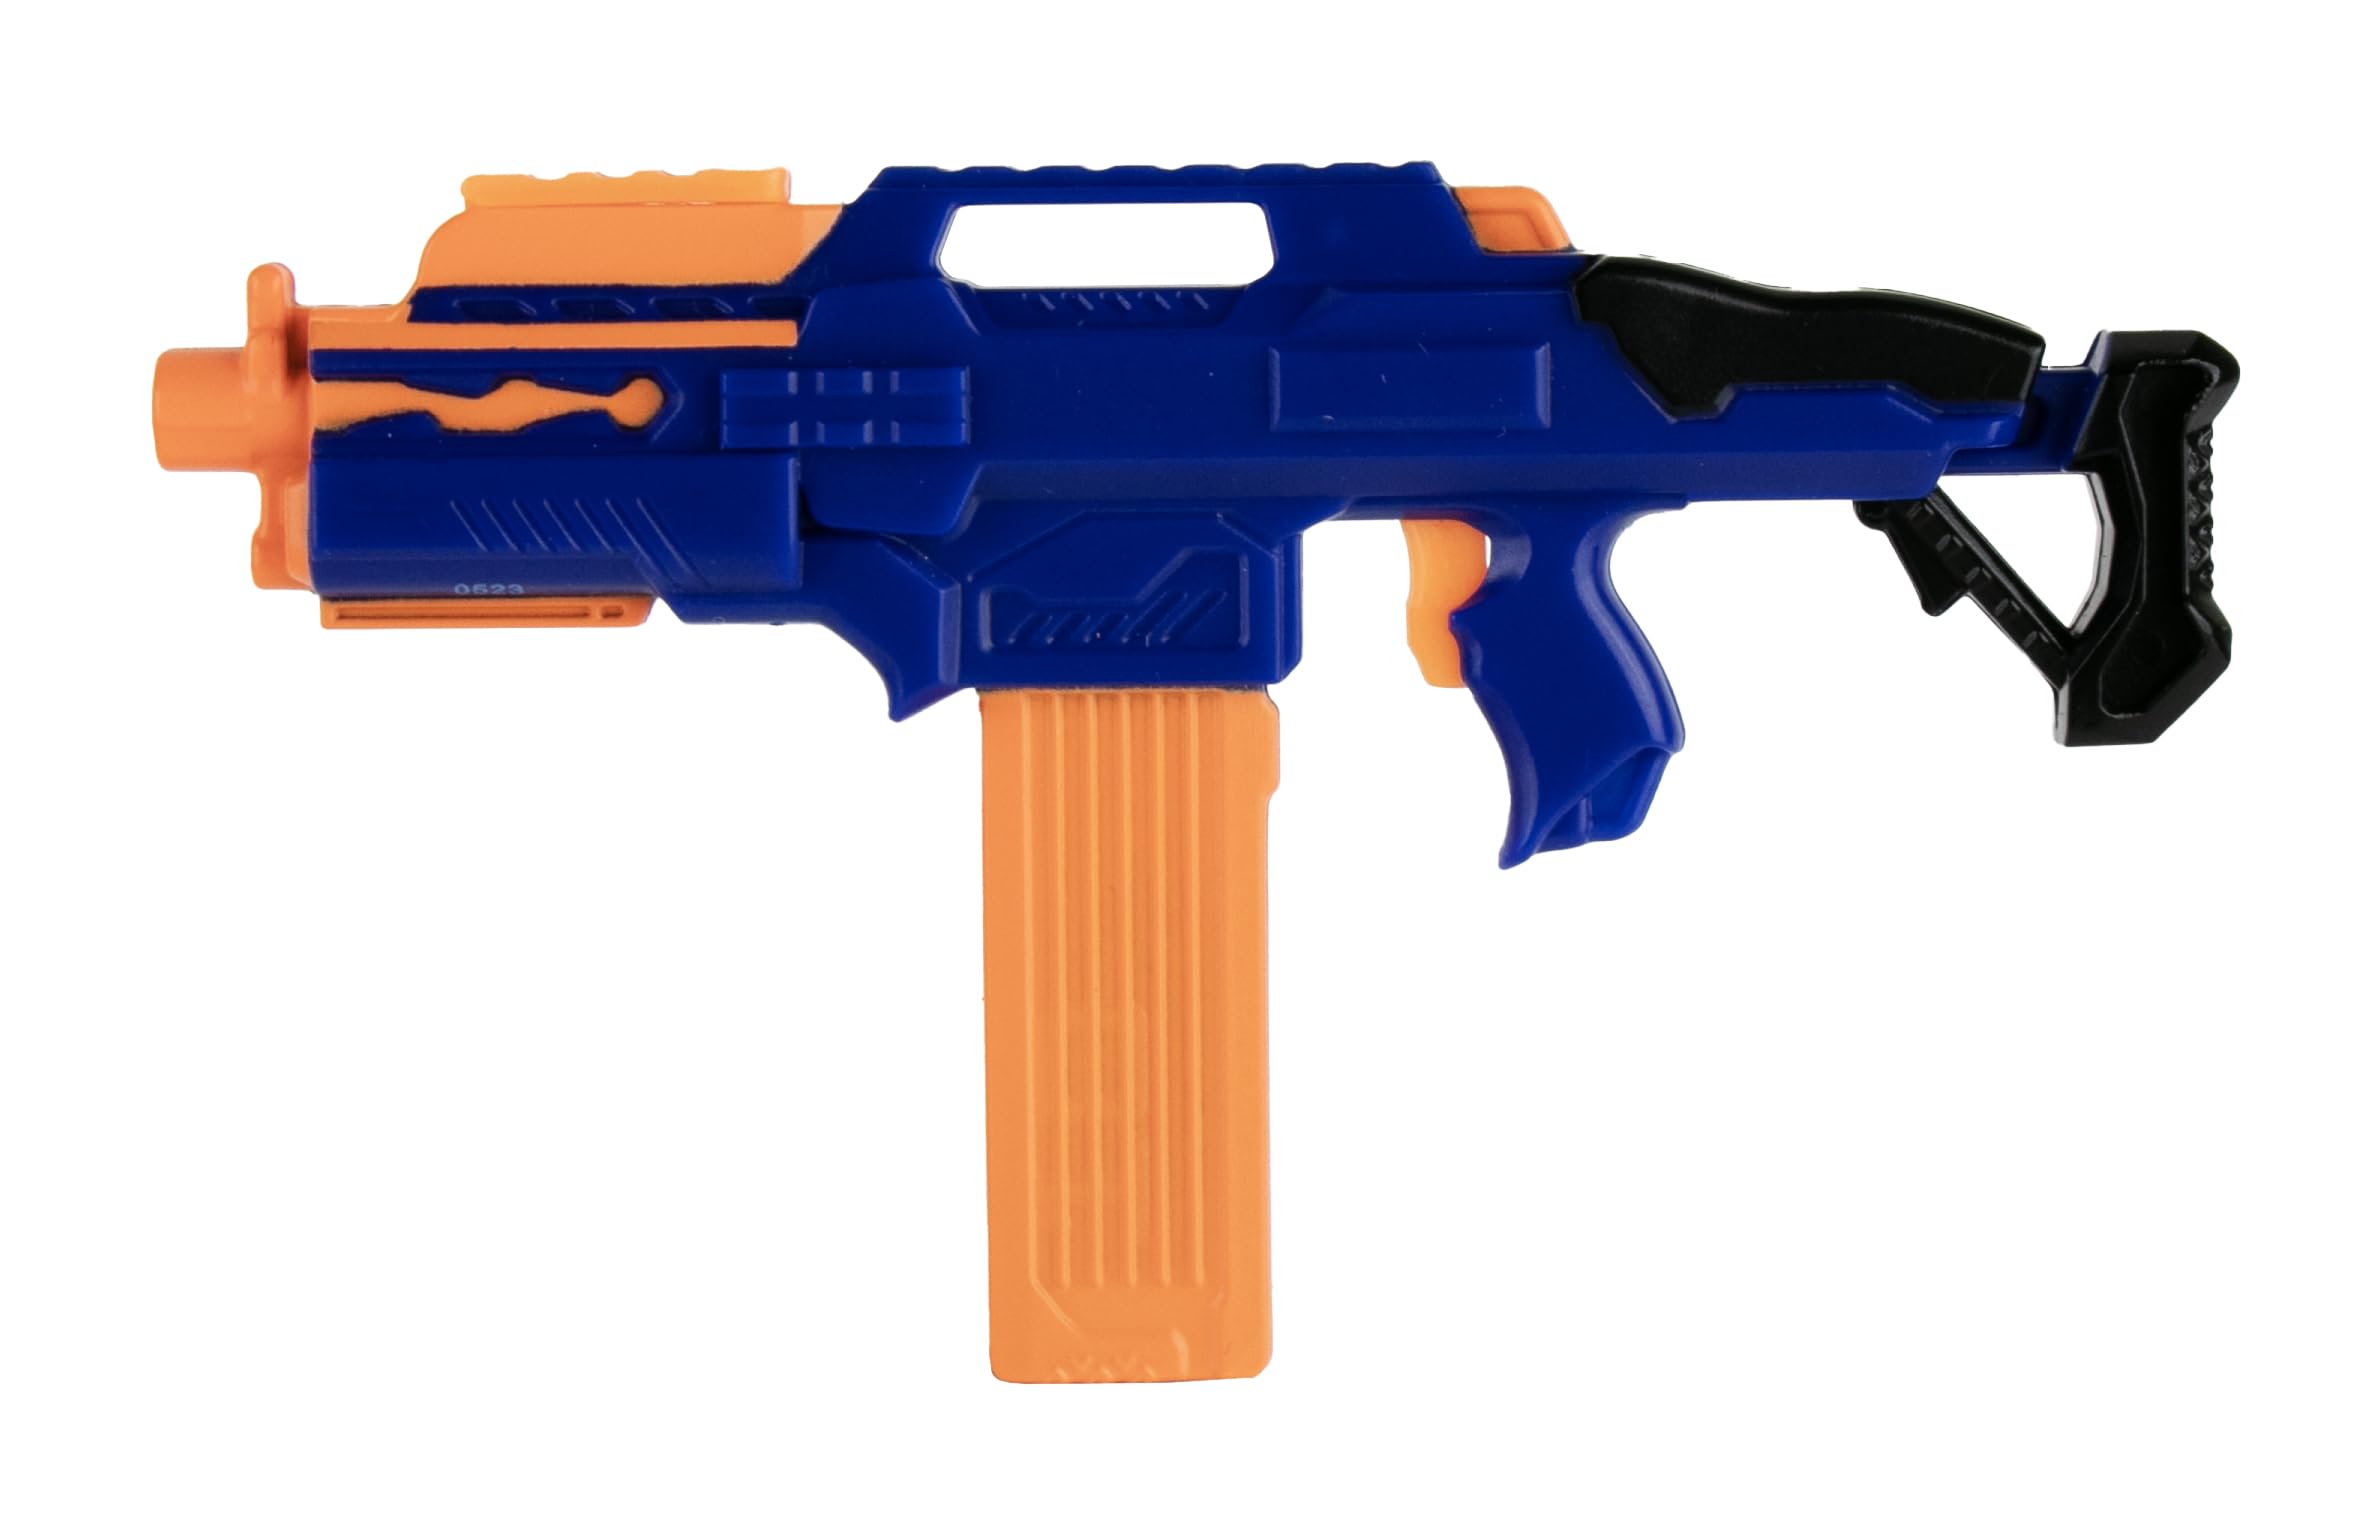 World's Smallest Nerf Elite 2.0 Blasters. Three Distinct Styles to Collect – Styles Selected at Random.